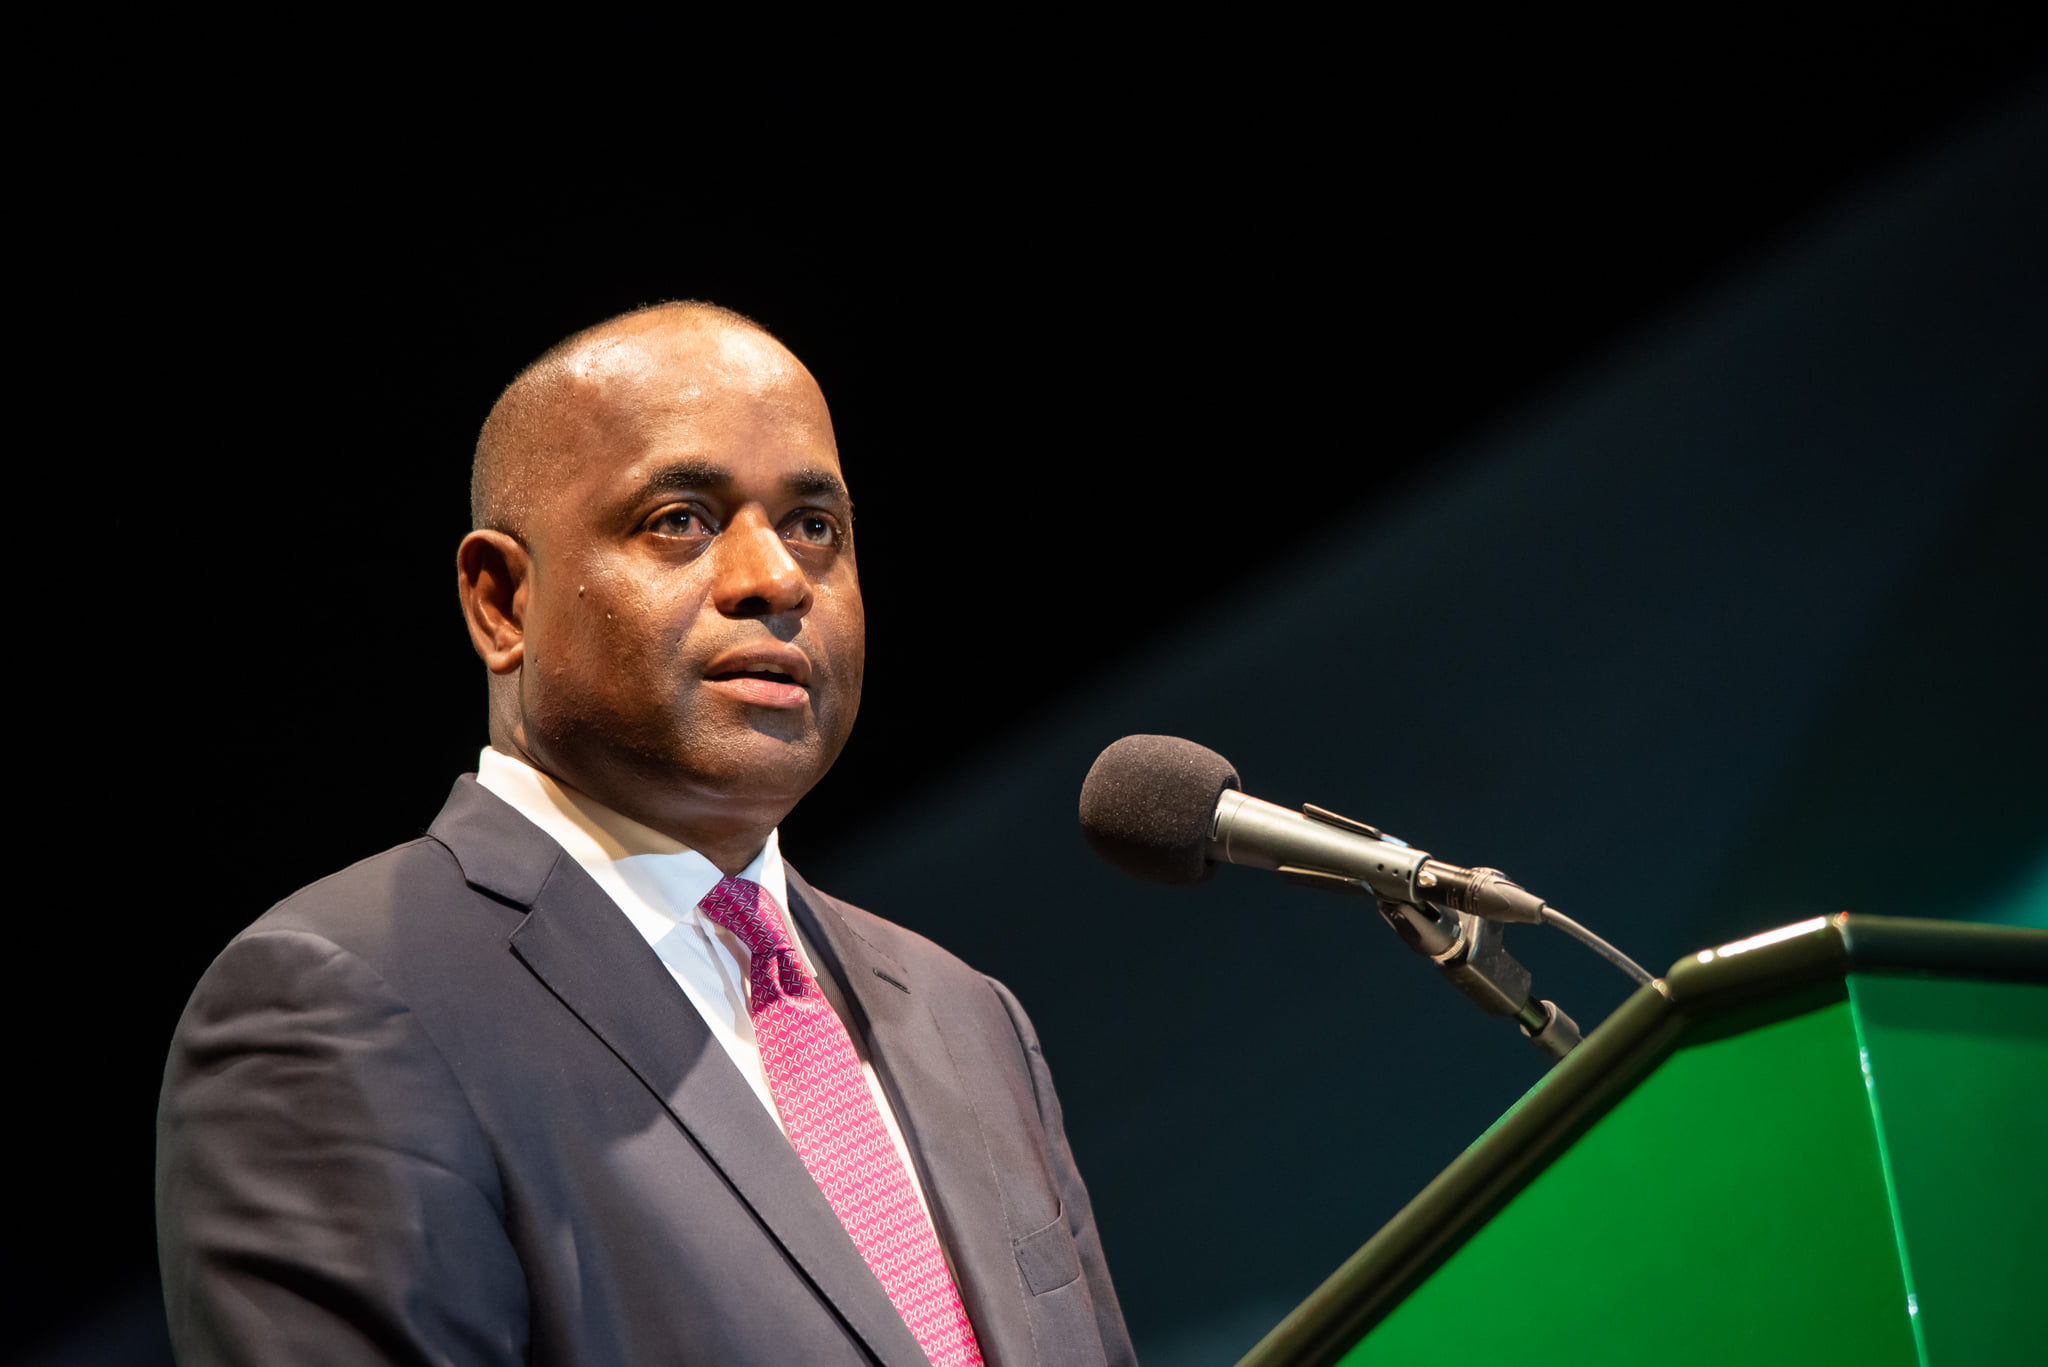 Roosevelt Skerrit to remain leader of Dominica following snap elections boycotted by Opposition